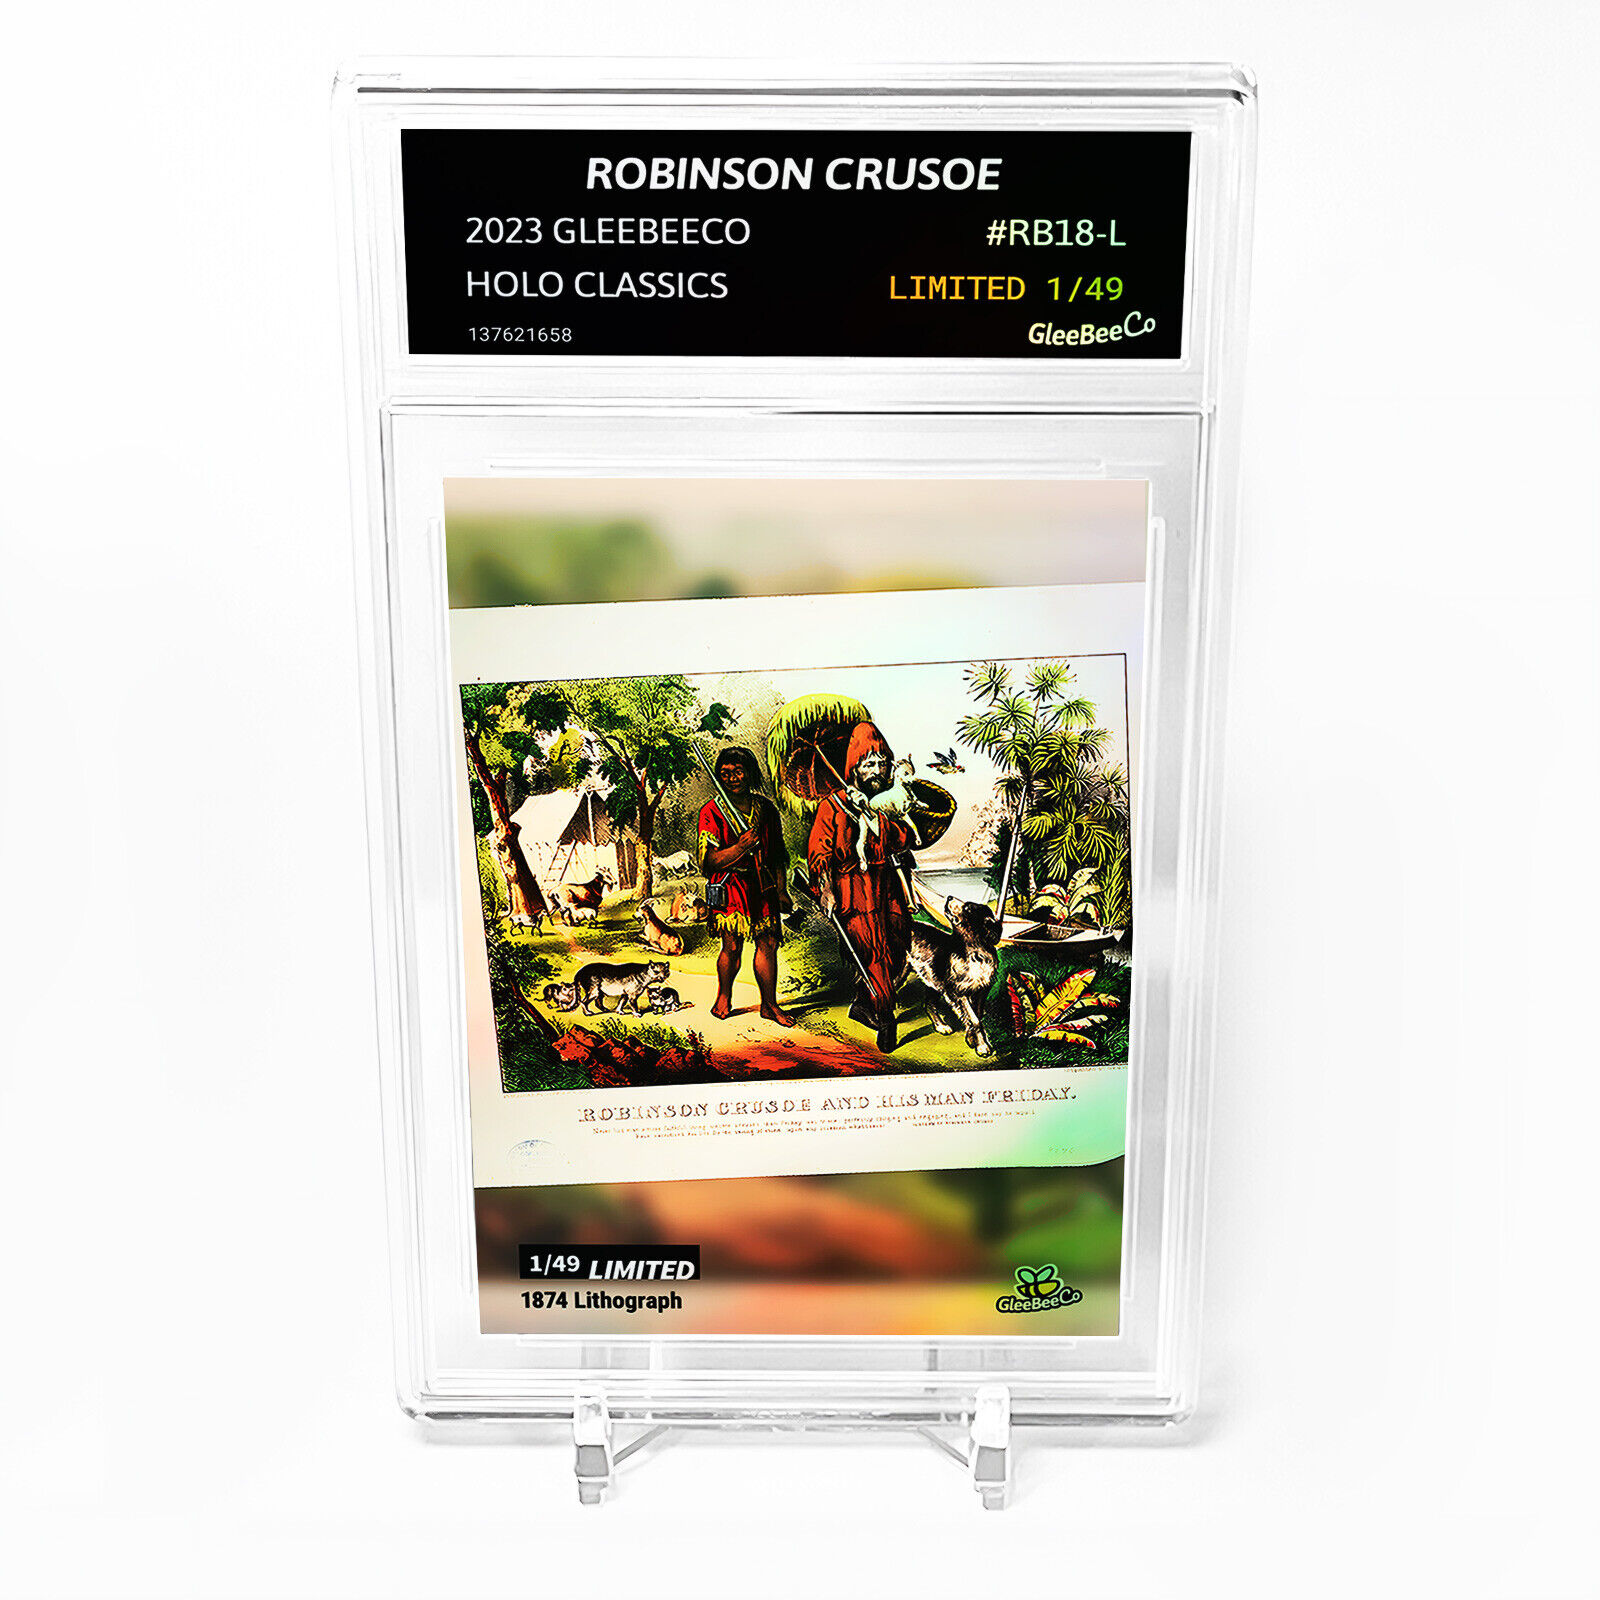 ROBINSON CRUSOE AND FRIDAY Card 2023 GleeBeeCo #RB18-L - Limited Edition /49